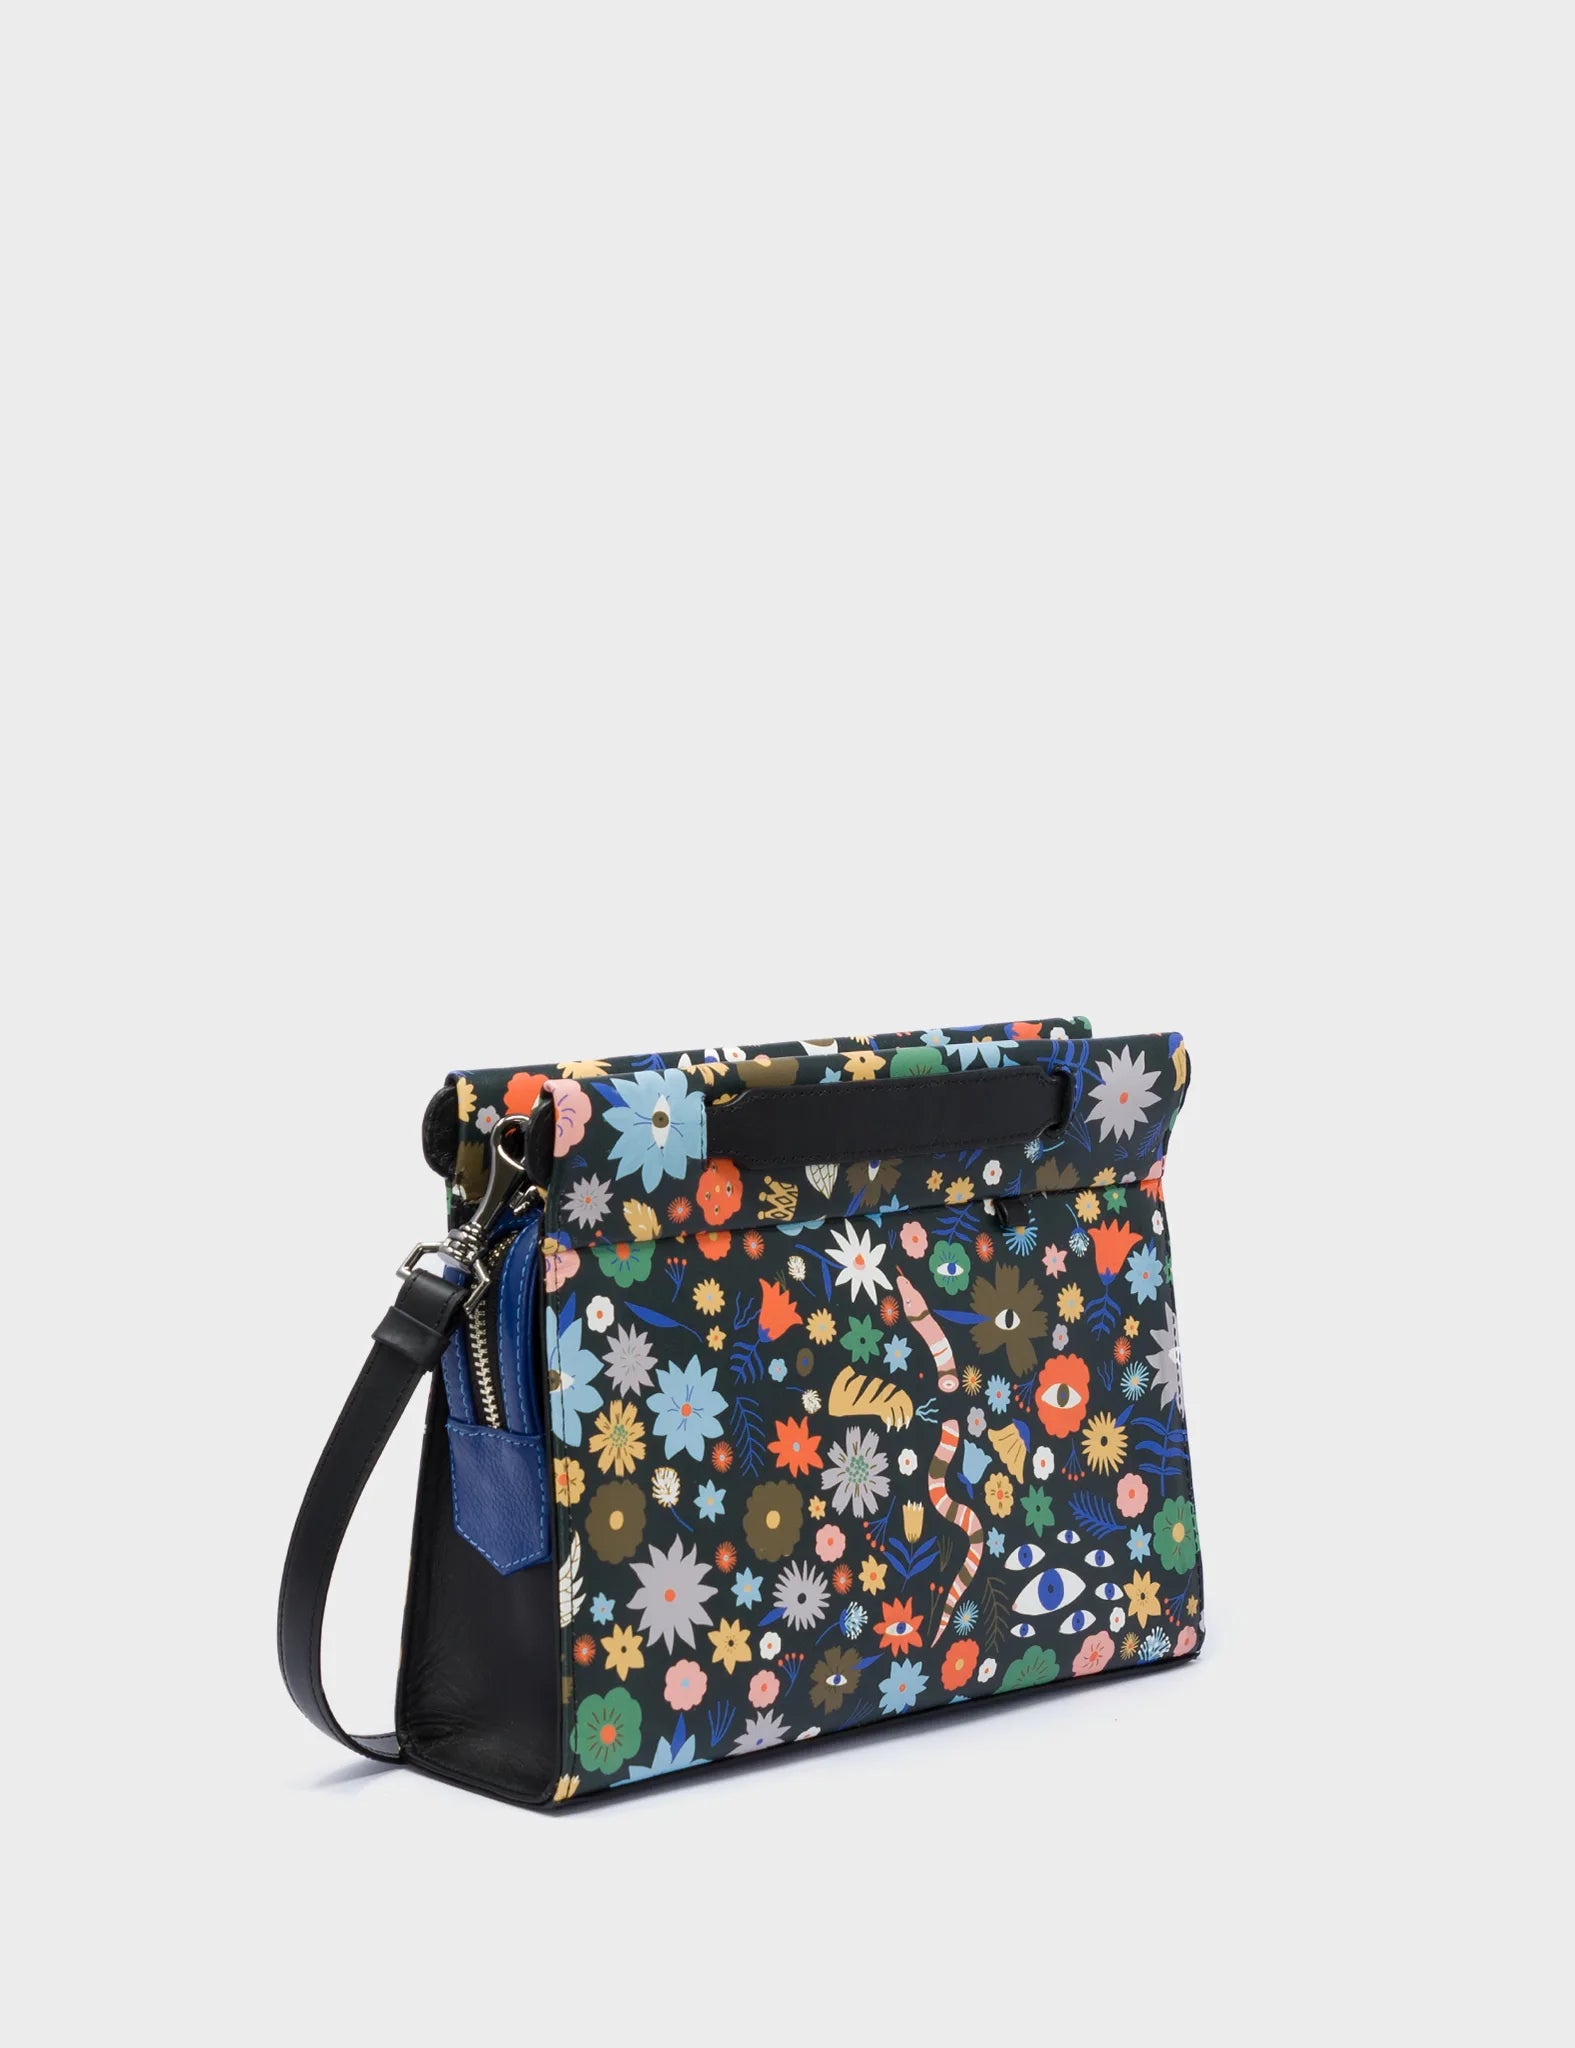 Crossbody Small Black Leather Bag - Floral Pattern Print